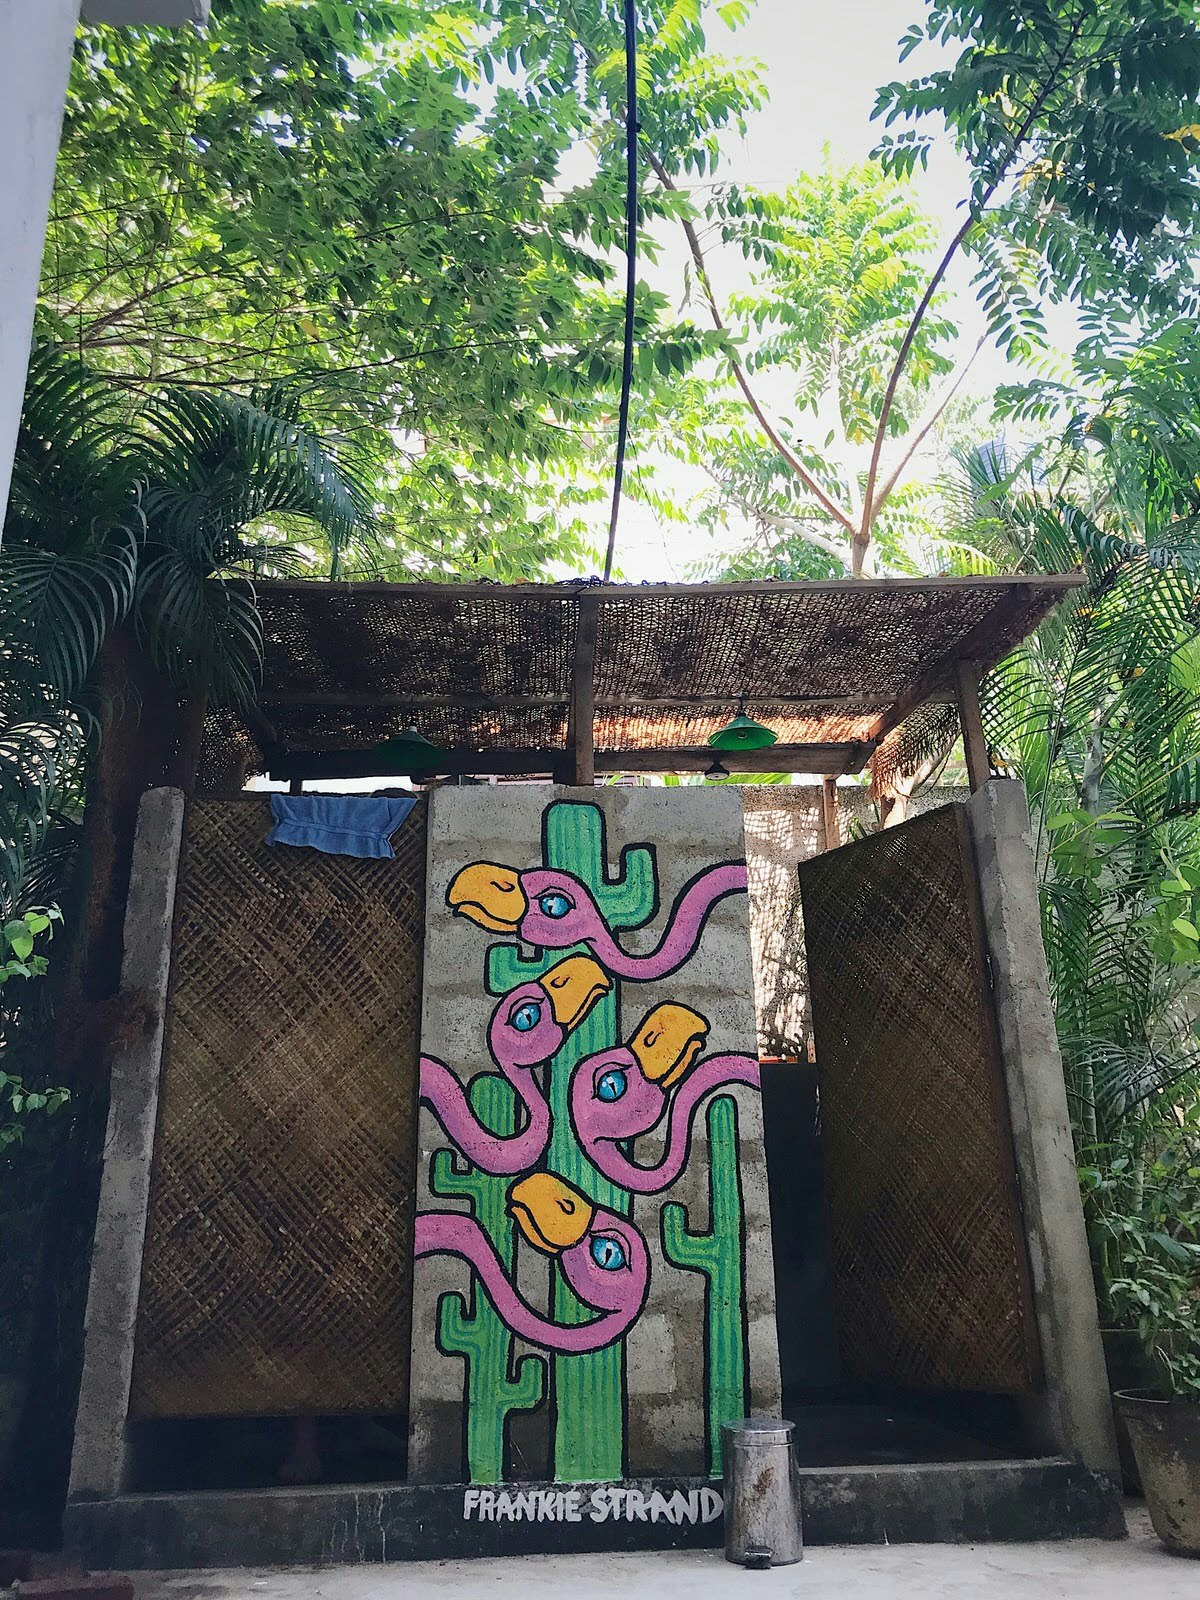 A mural painted on the wall of two outdoor showers. The shower cubicles have woven wicker doors and sit under a canopy of tropical leaves with blue sky peeking through. The colourful mural shows four flamingo heads set against a backdrop of cacti.